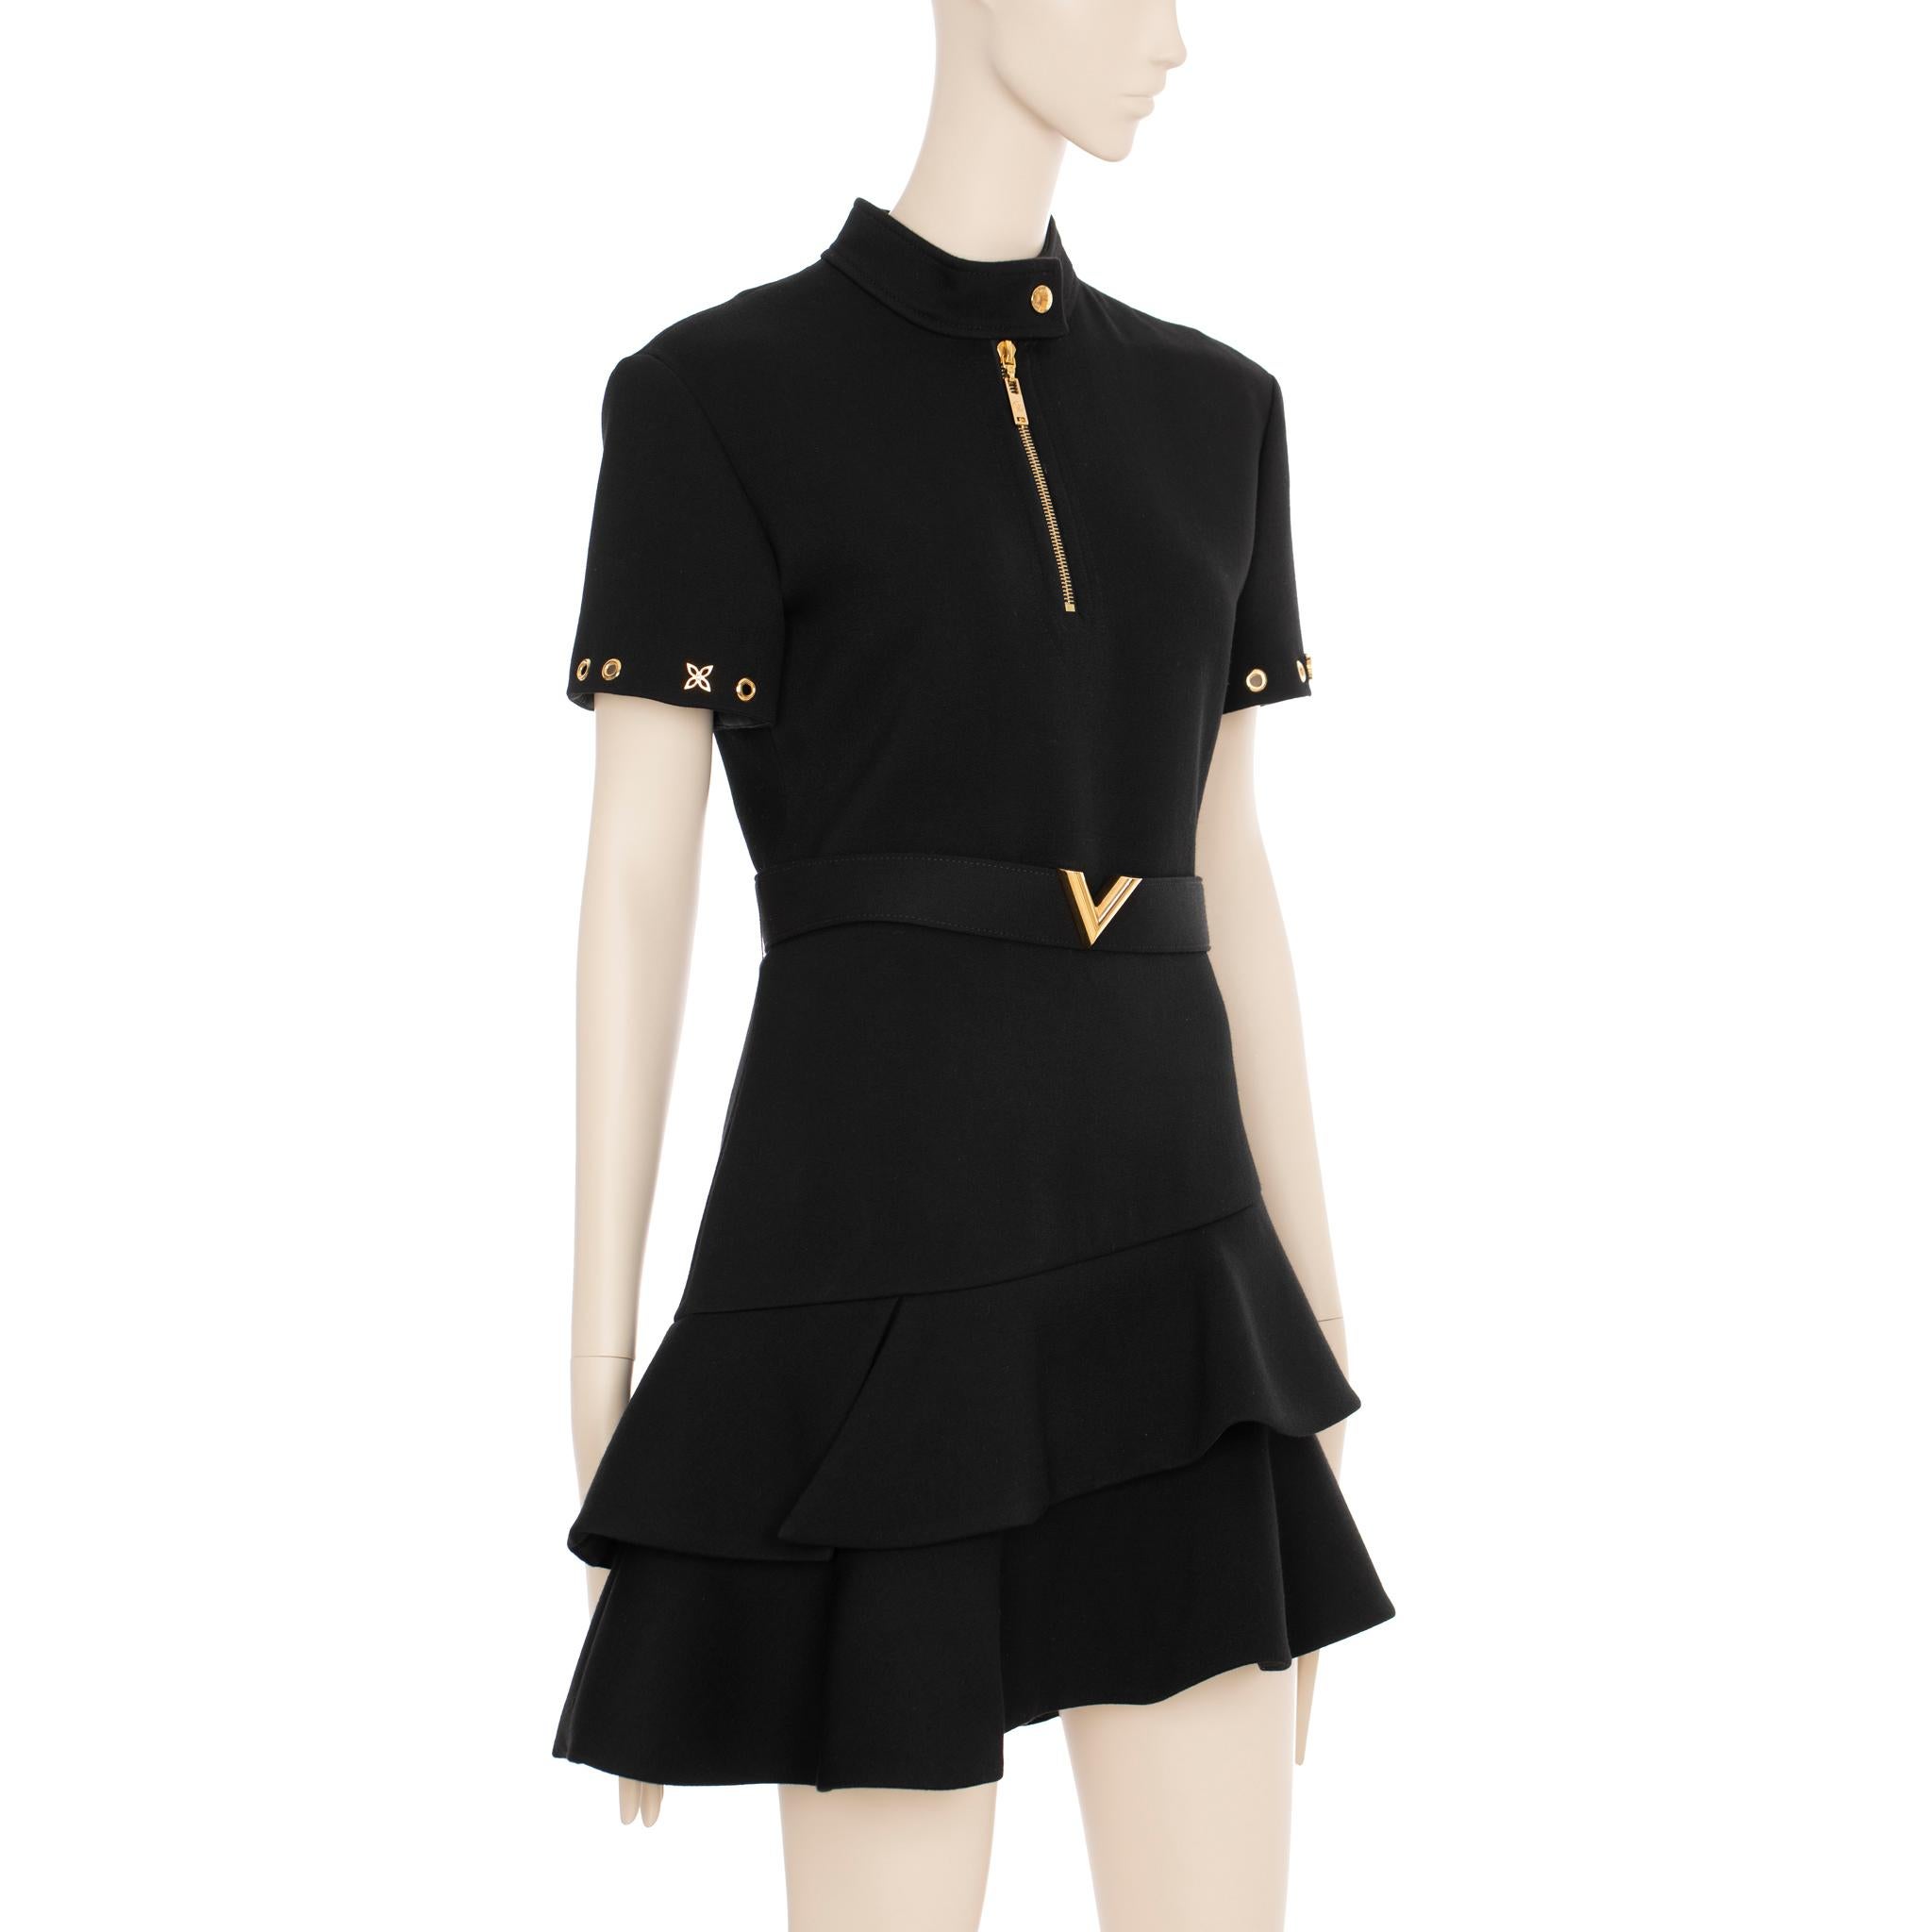 This timeless Louis Vuitton dress features a classic peplum skirt, making it perfect for any formal occasion. Crafted from a luxurious black fabric, the dress is chic, stylish, and sure to make a statement at any gathering.

Brand: Louis